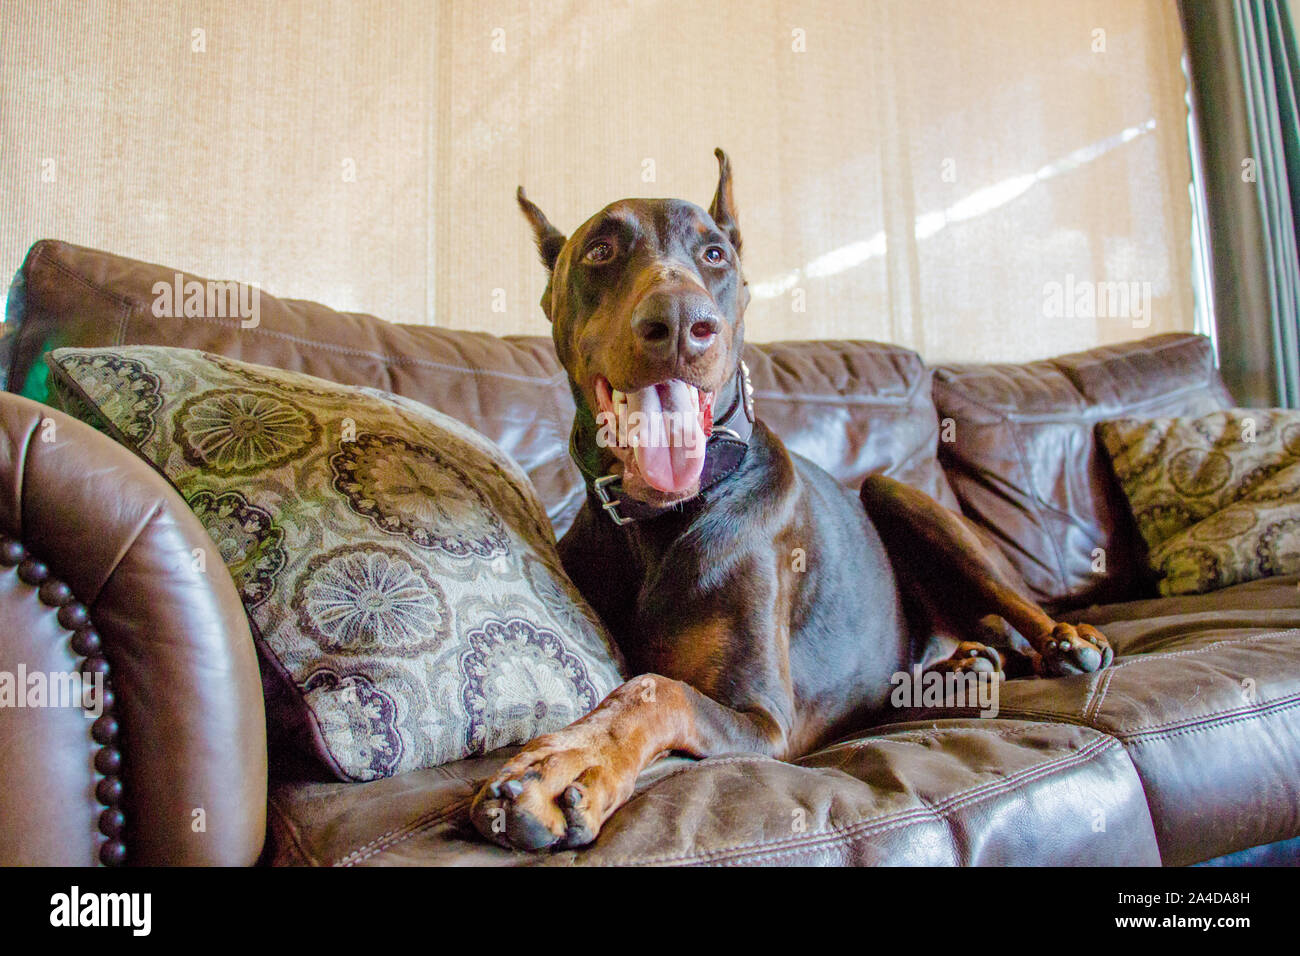 Red warlock doberman pinscher dog lying on a couch Stock Photo